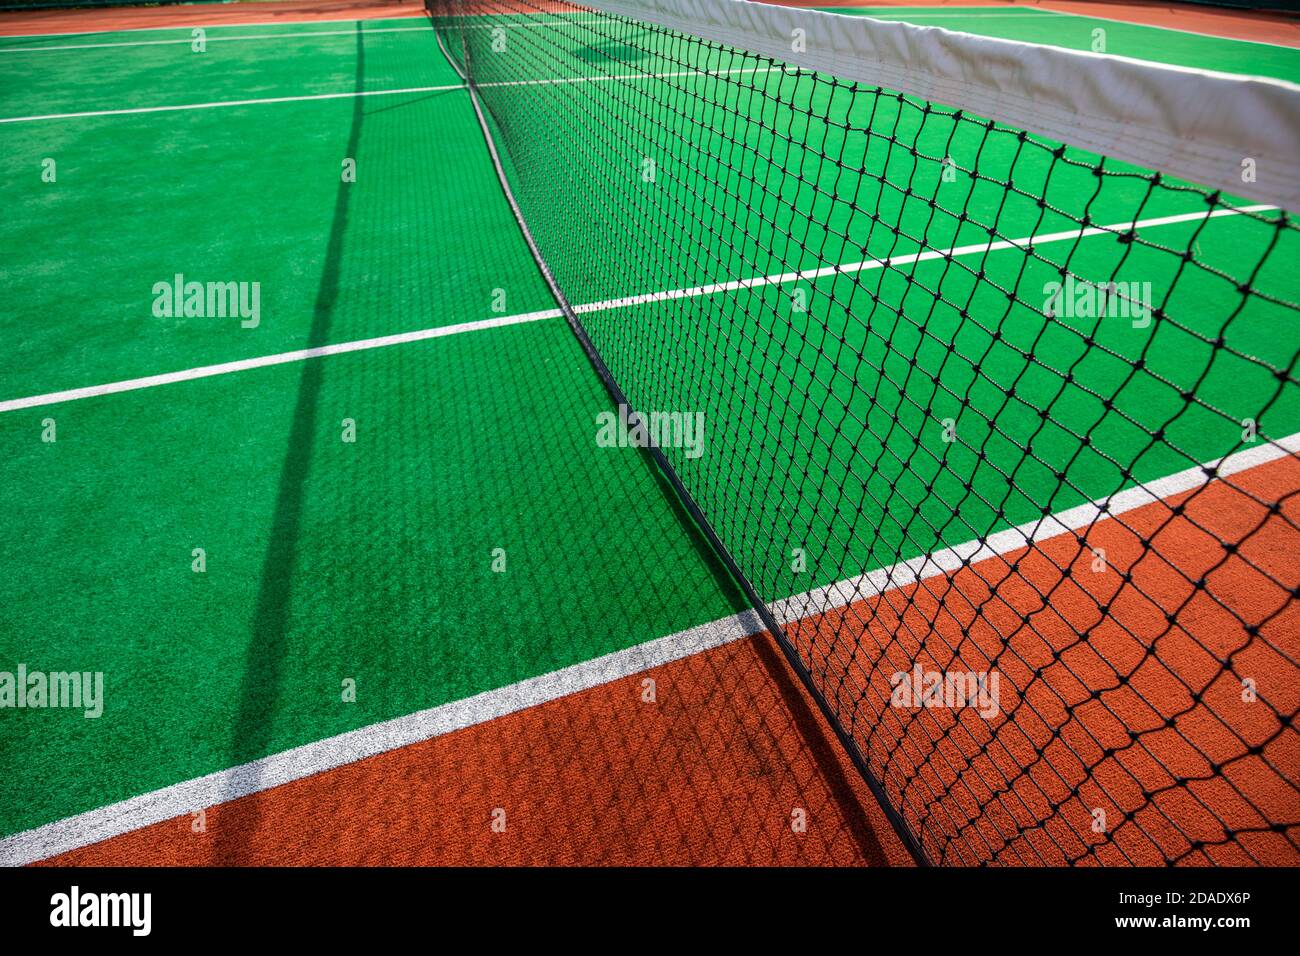 Tennis clay court. Tennis courts making an interesting pattern. Abstract summer outdoor sport, recreational background, tennis court in a sunny day Stock Photo